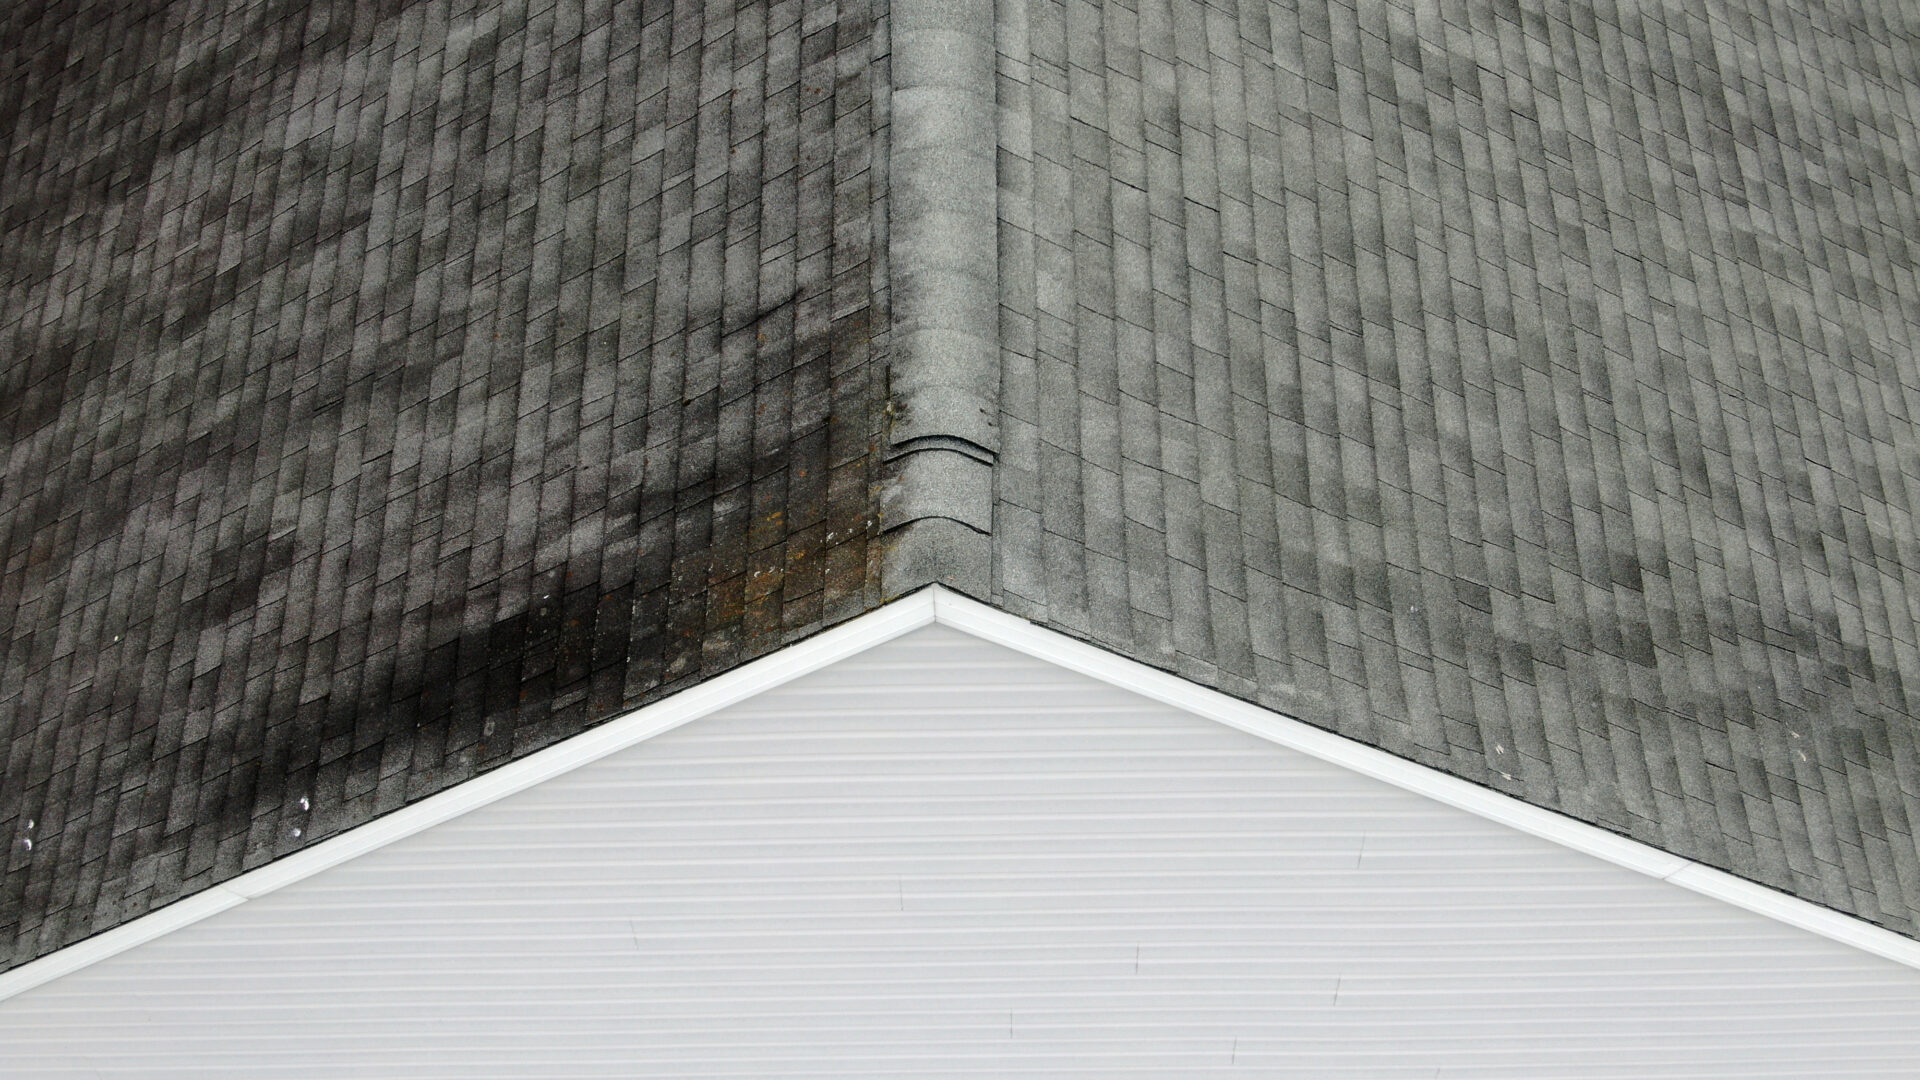 A home with a gray roof and leaking water